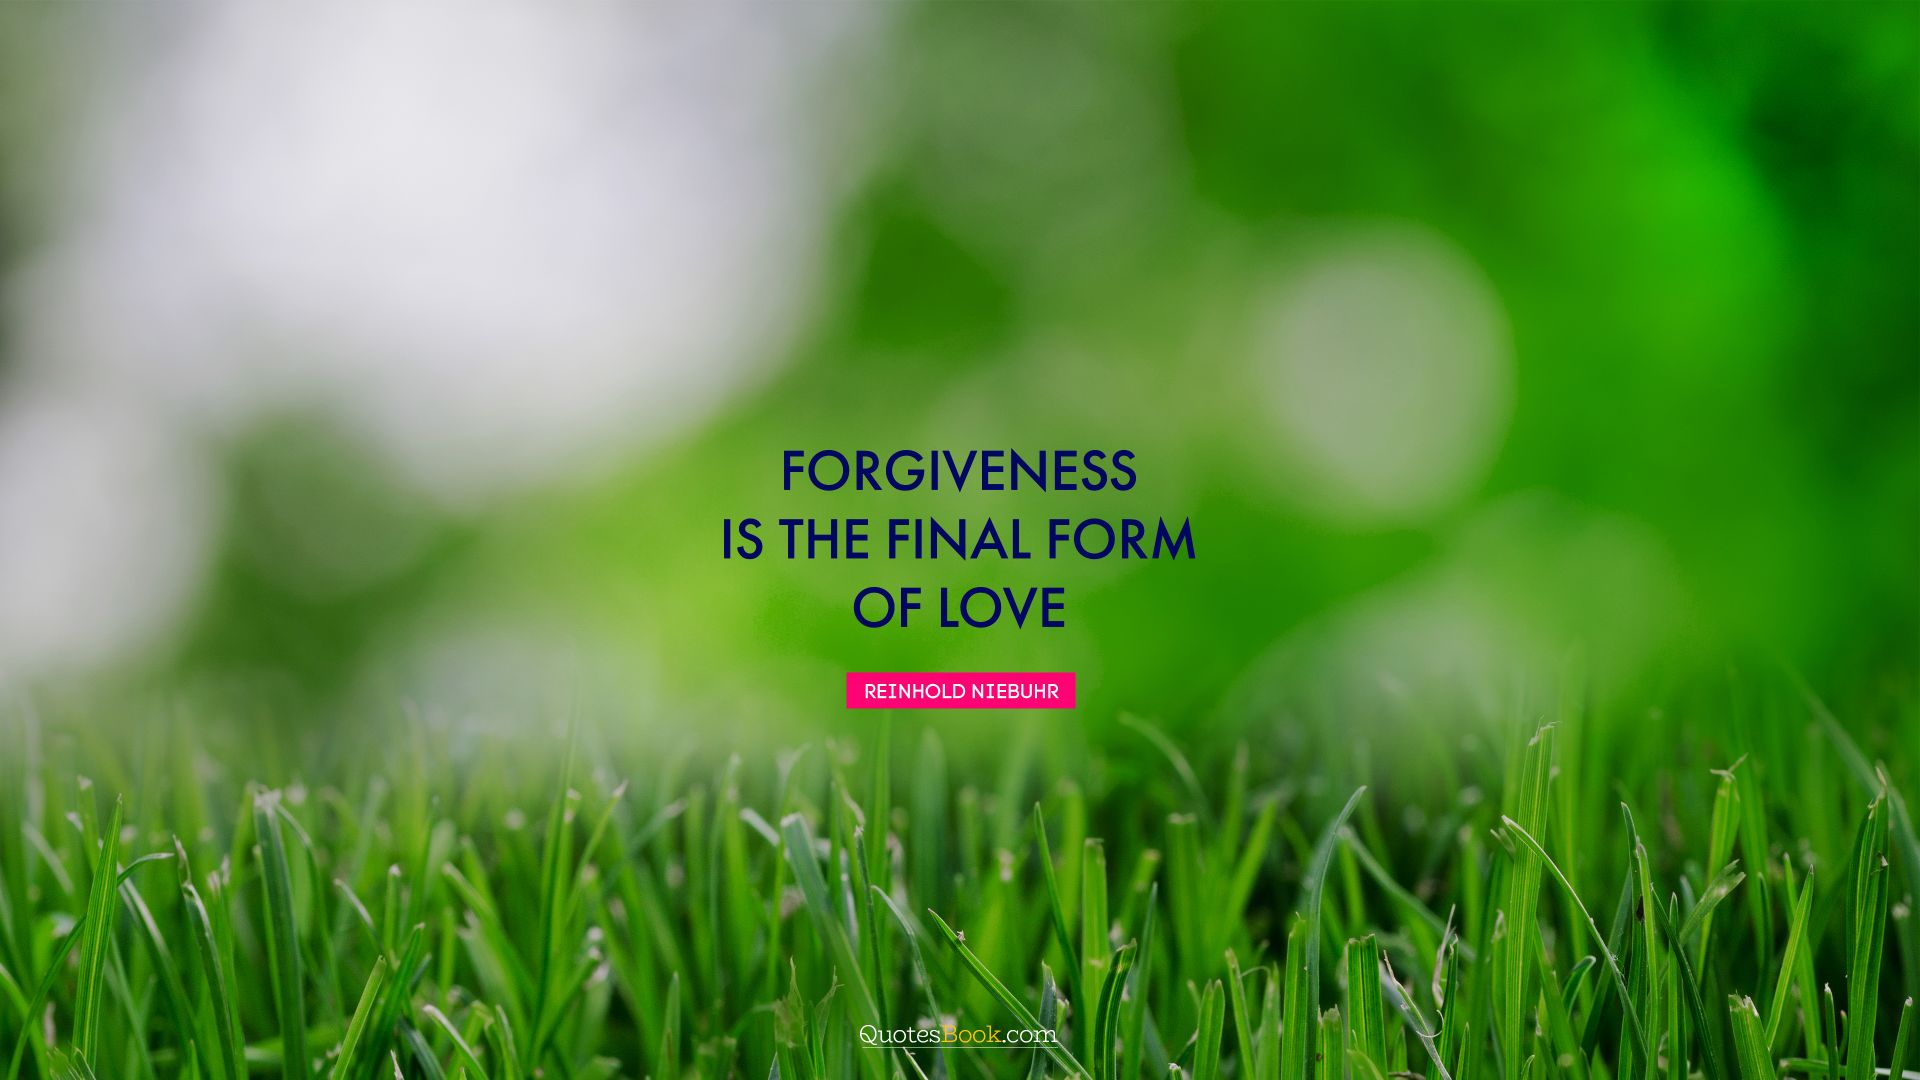 Forgiveness is the final form of love. - Quote by Reinhold Niebuhr